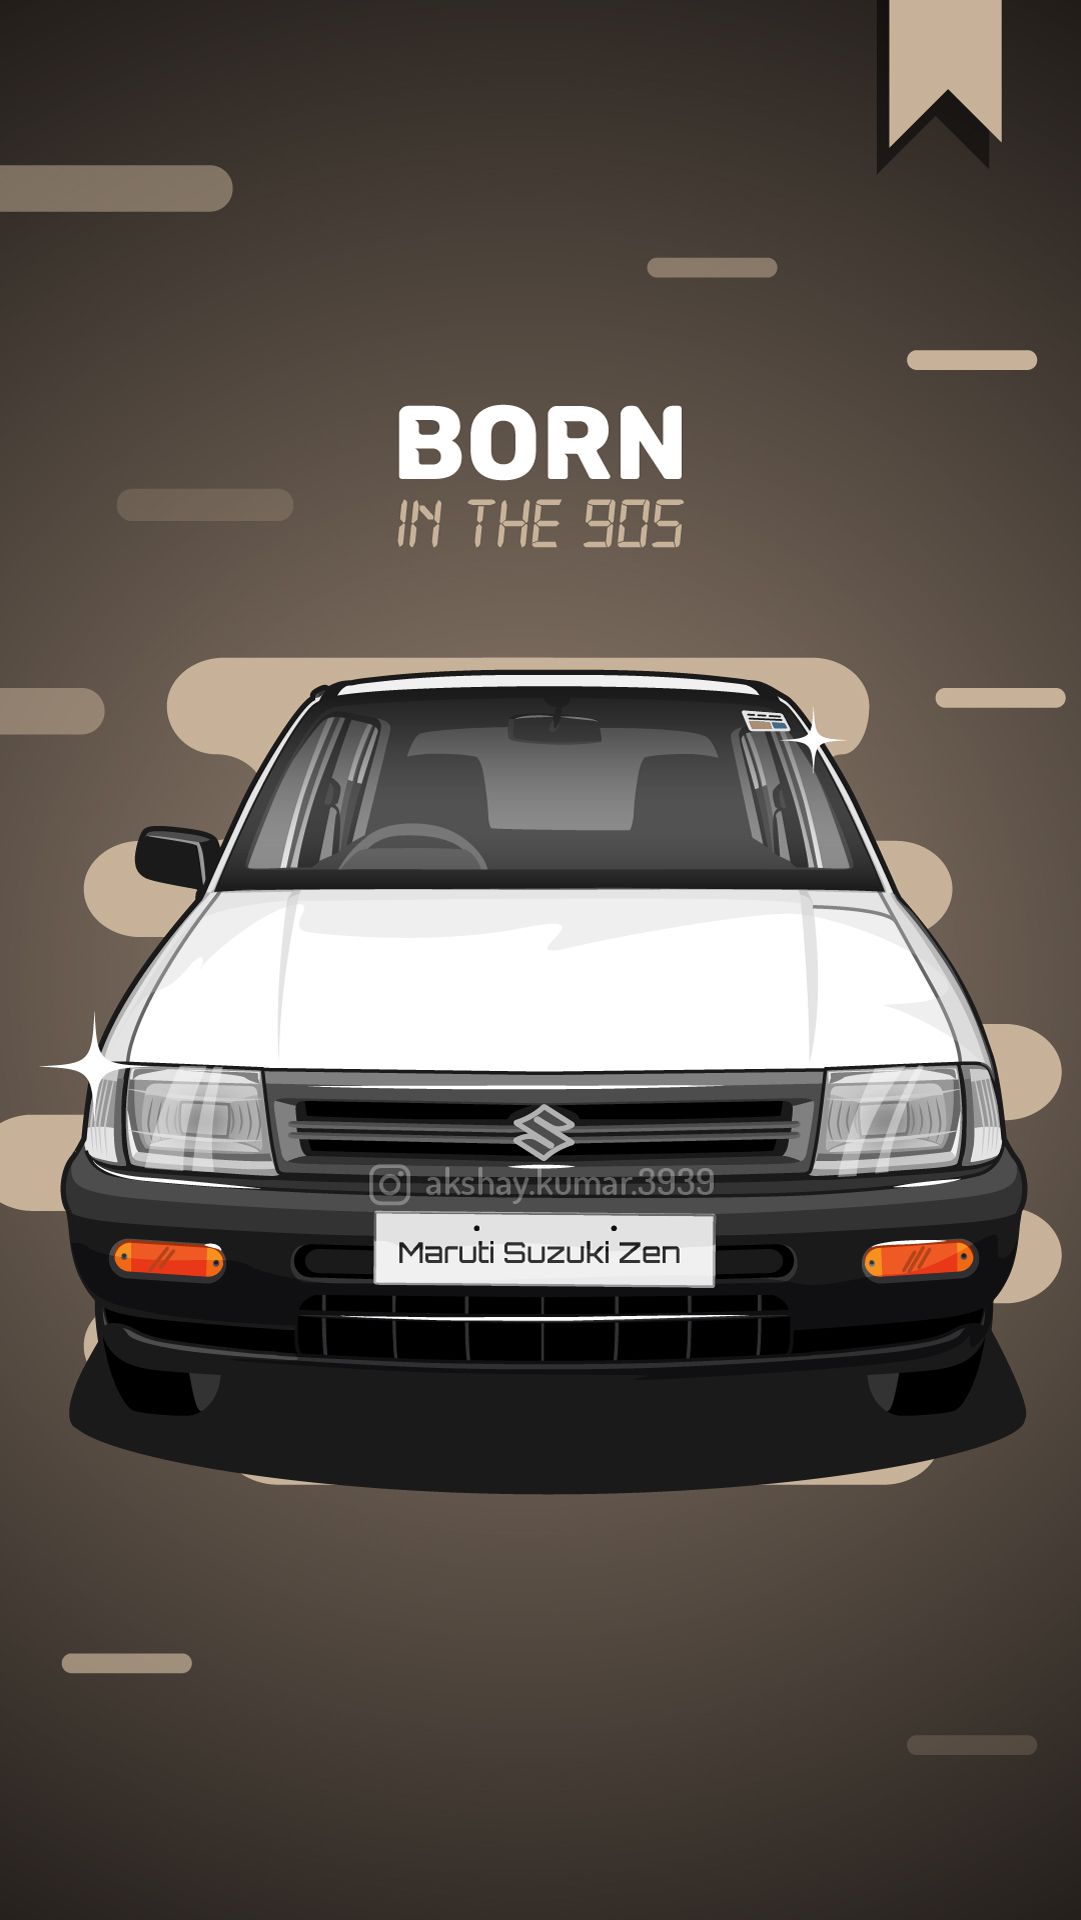 For more such Indian Cars Vector Artworks, follow my instagram